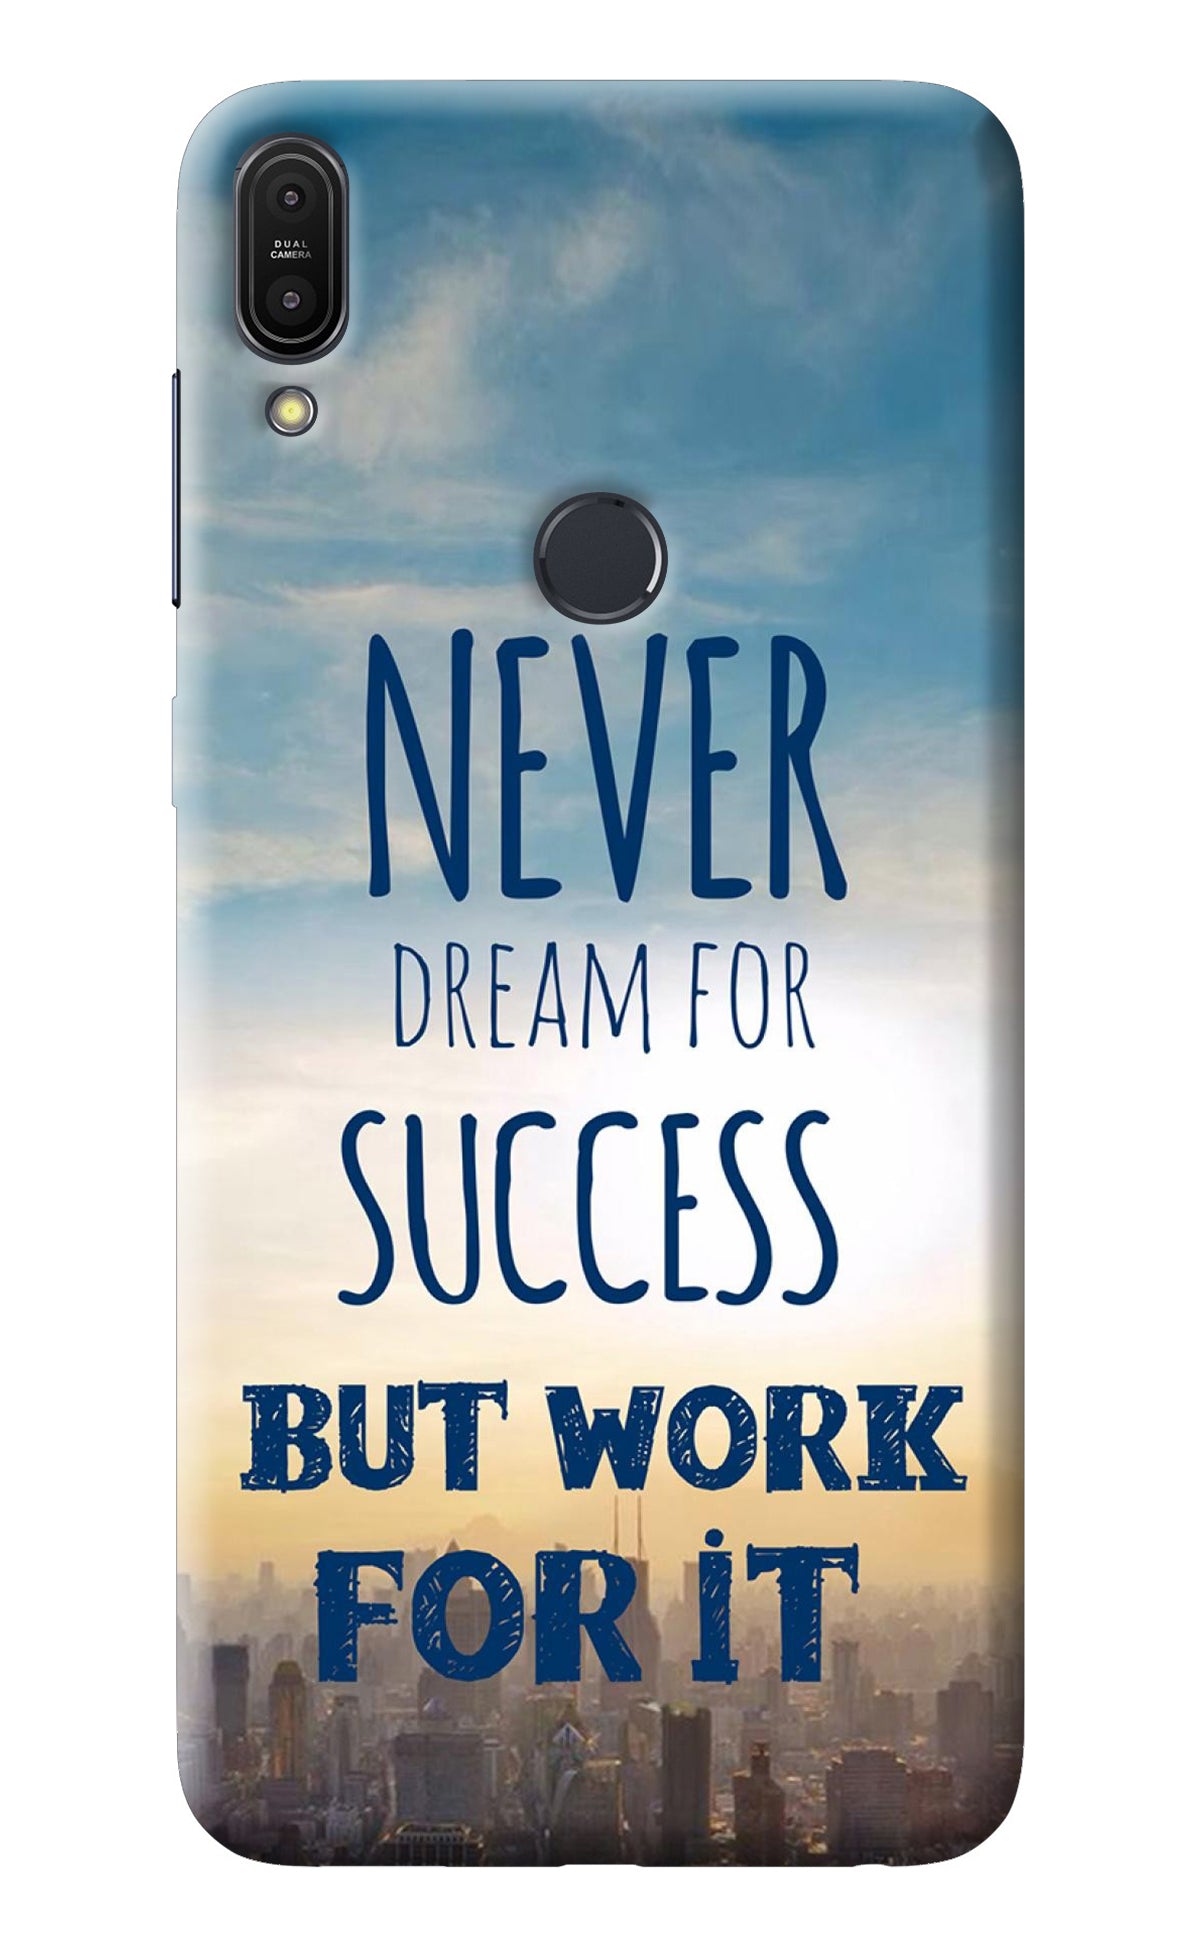 Never Dream For Success But Work For It Asus Zenfone Max Pro M1 Back Cover